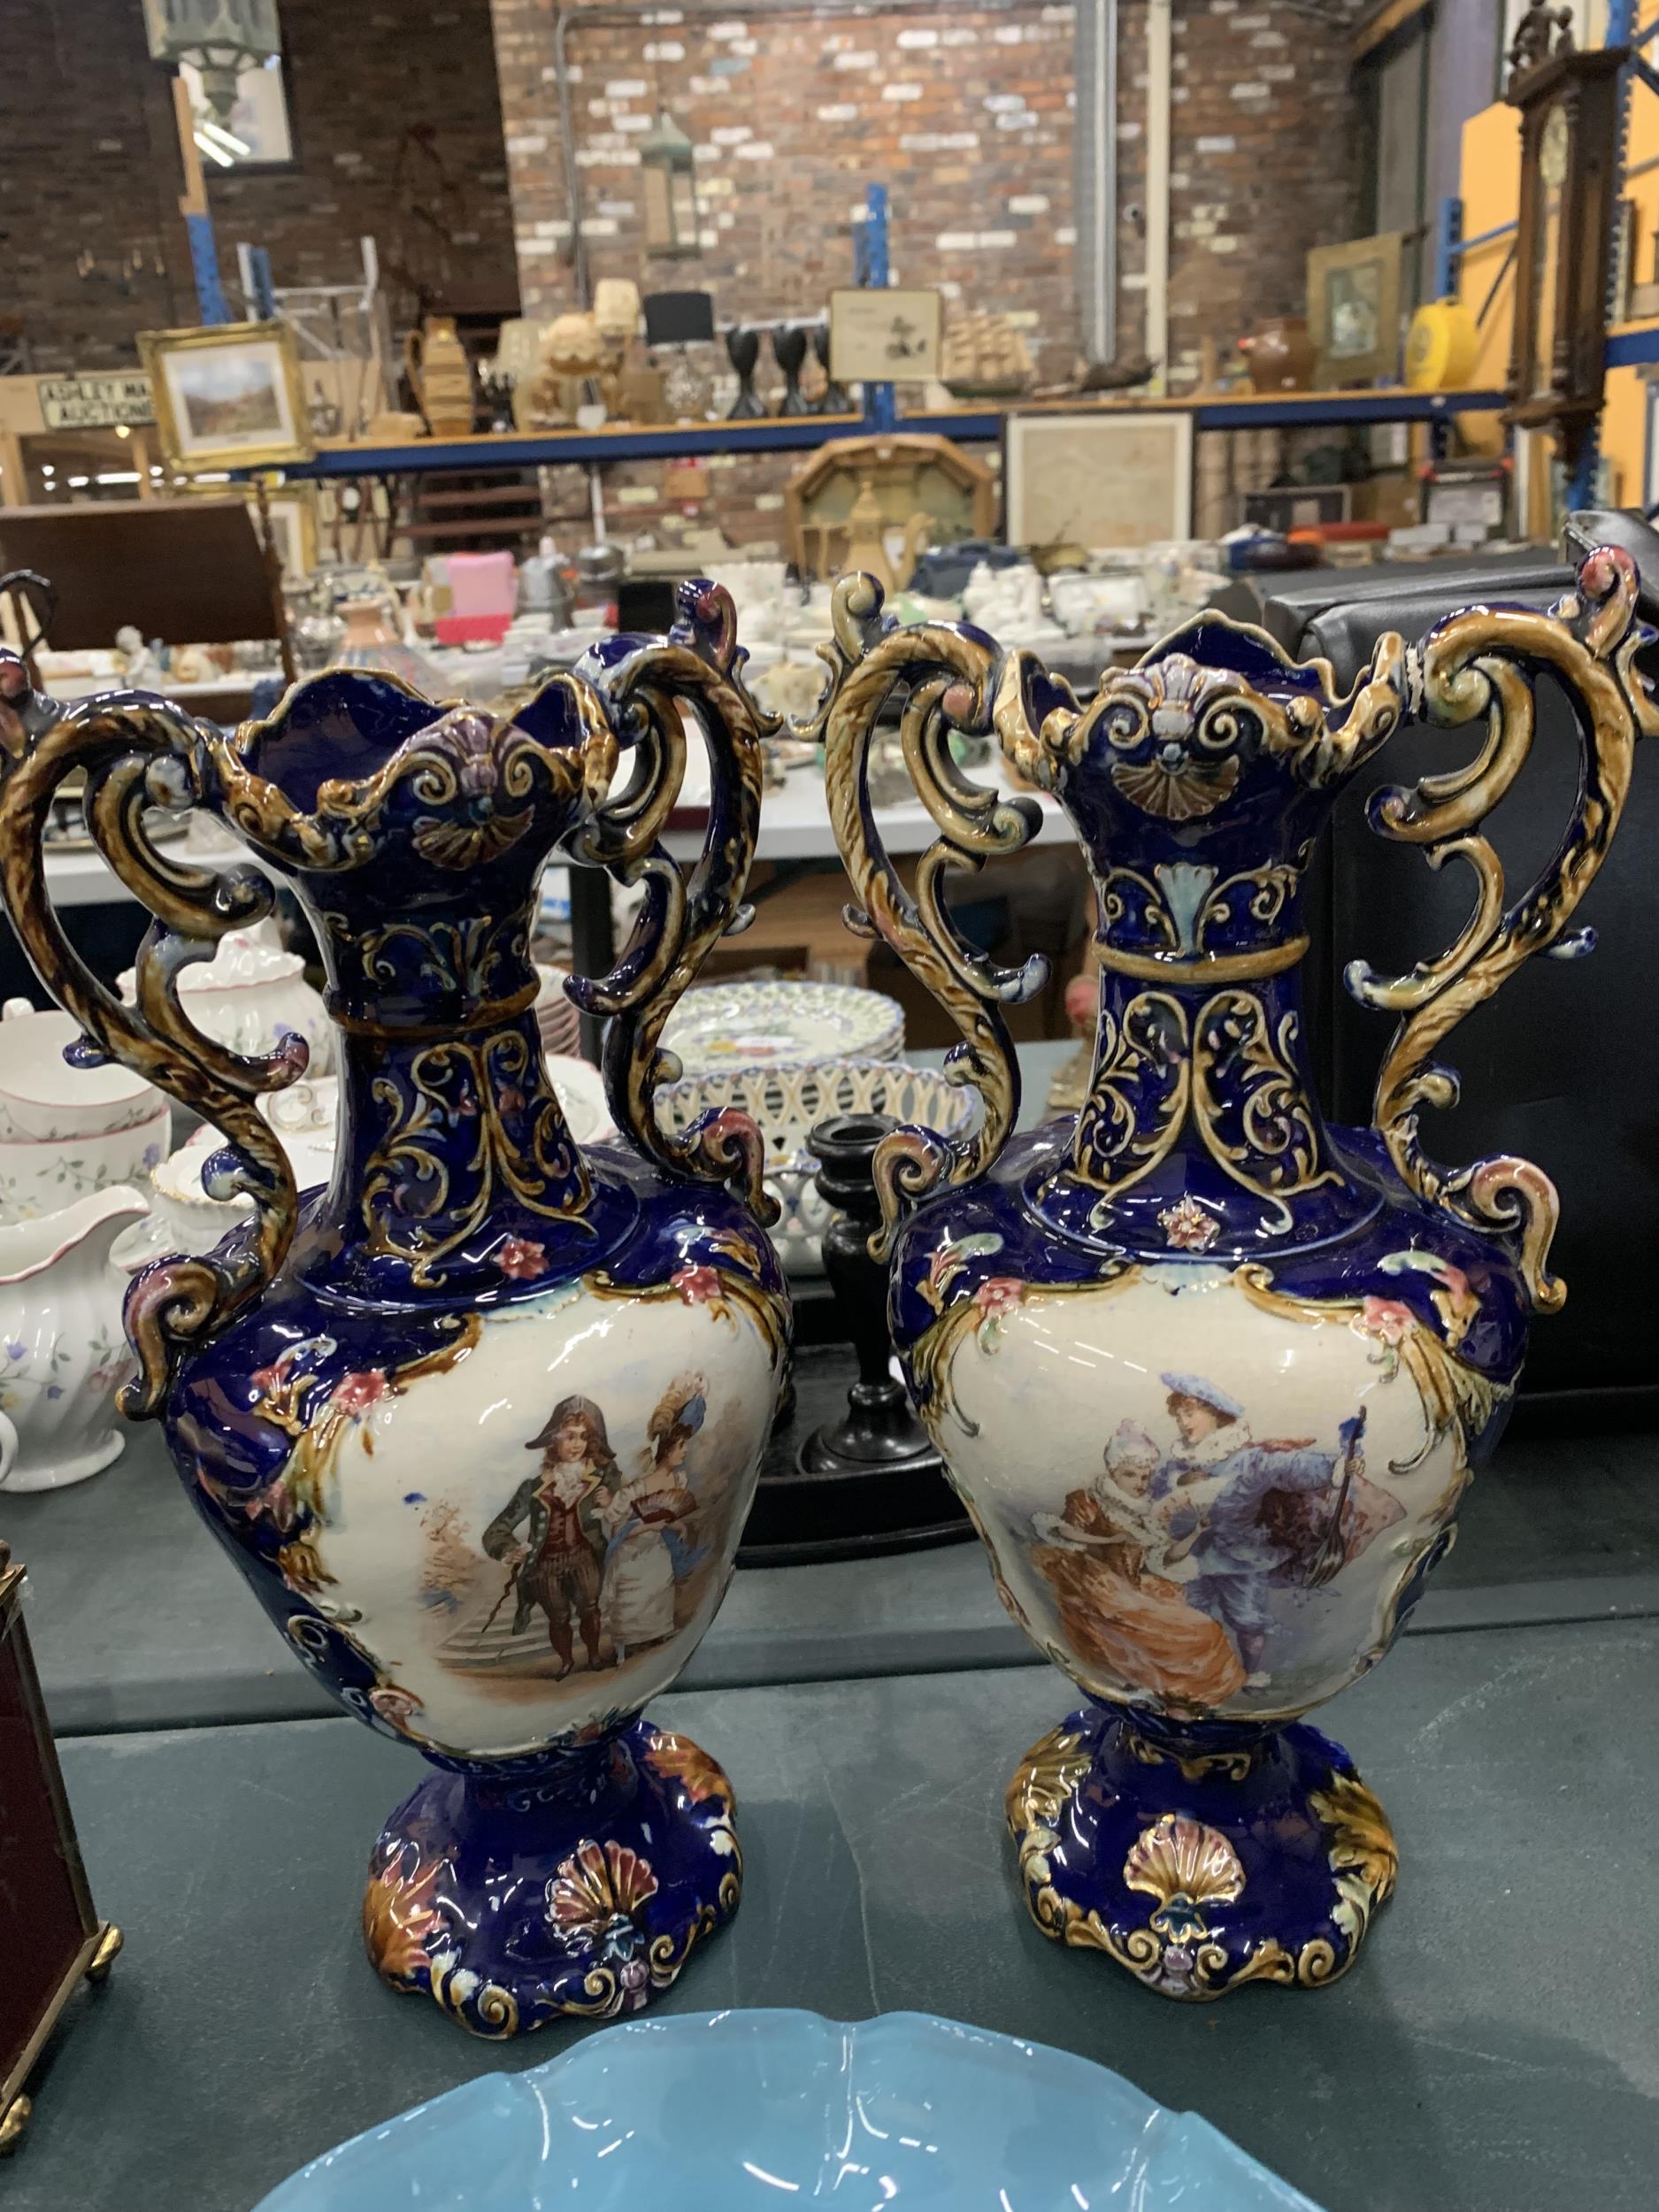 A PAIR OF VICTORIAN VASES IN COBALT BLUE WITH TRANSFER PRINT PATTERN PLUS A PALE BLUE GLASS FOOTED - Image 2 of 2